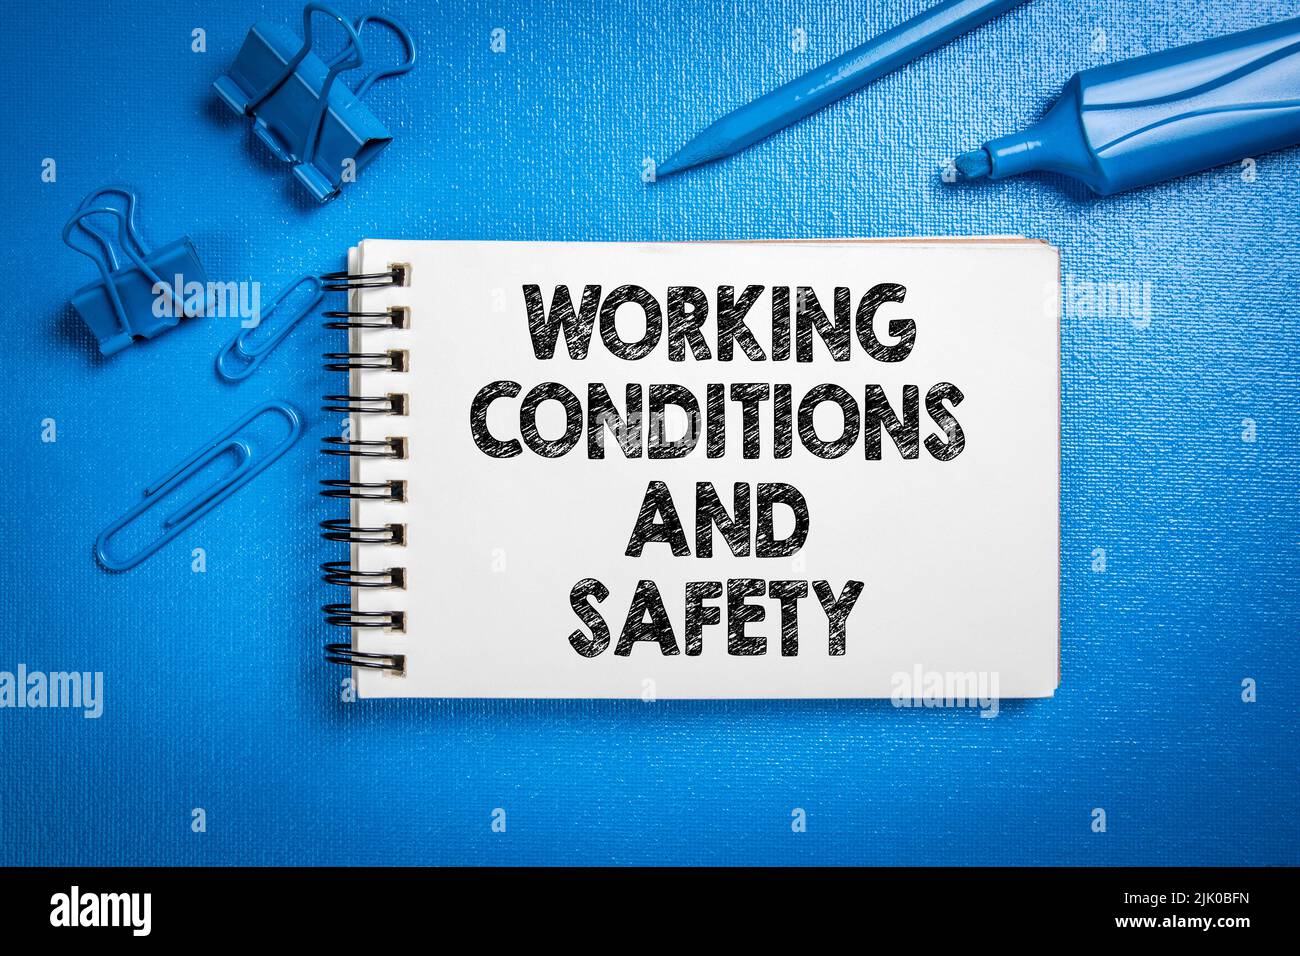 Working conditions and safety. Abstract office desk. Stock Photo